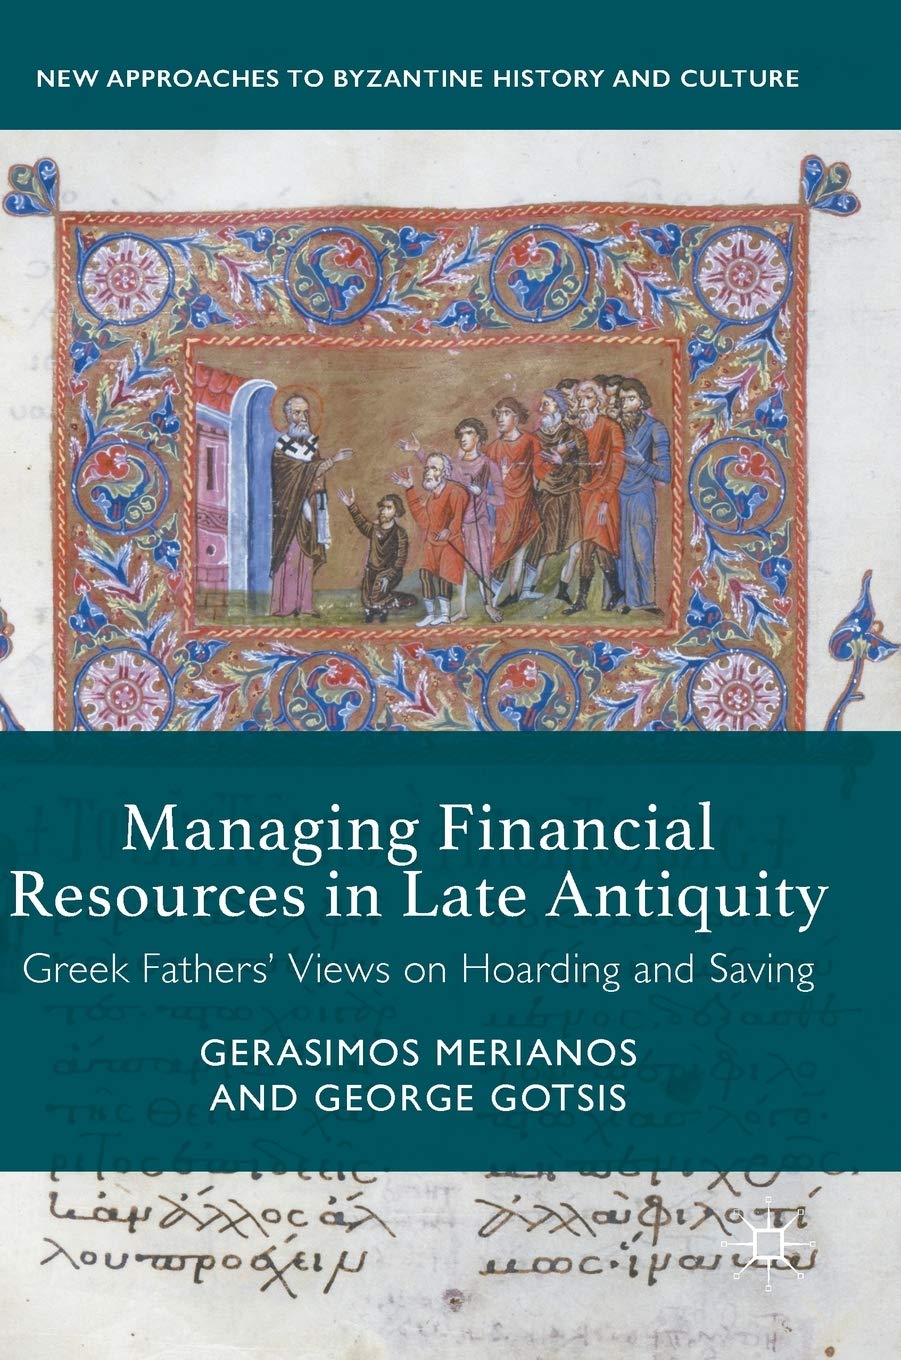 Managing Financial Resources in Late Antiquity: Greek Fathers' Views on Hoarding and Saving (New Approaches to Byzantine History and Culture)